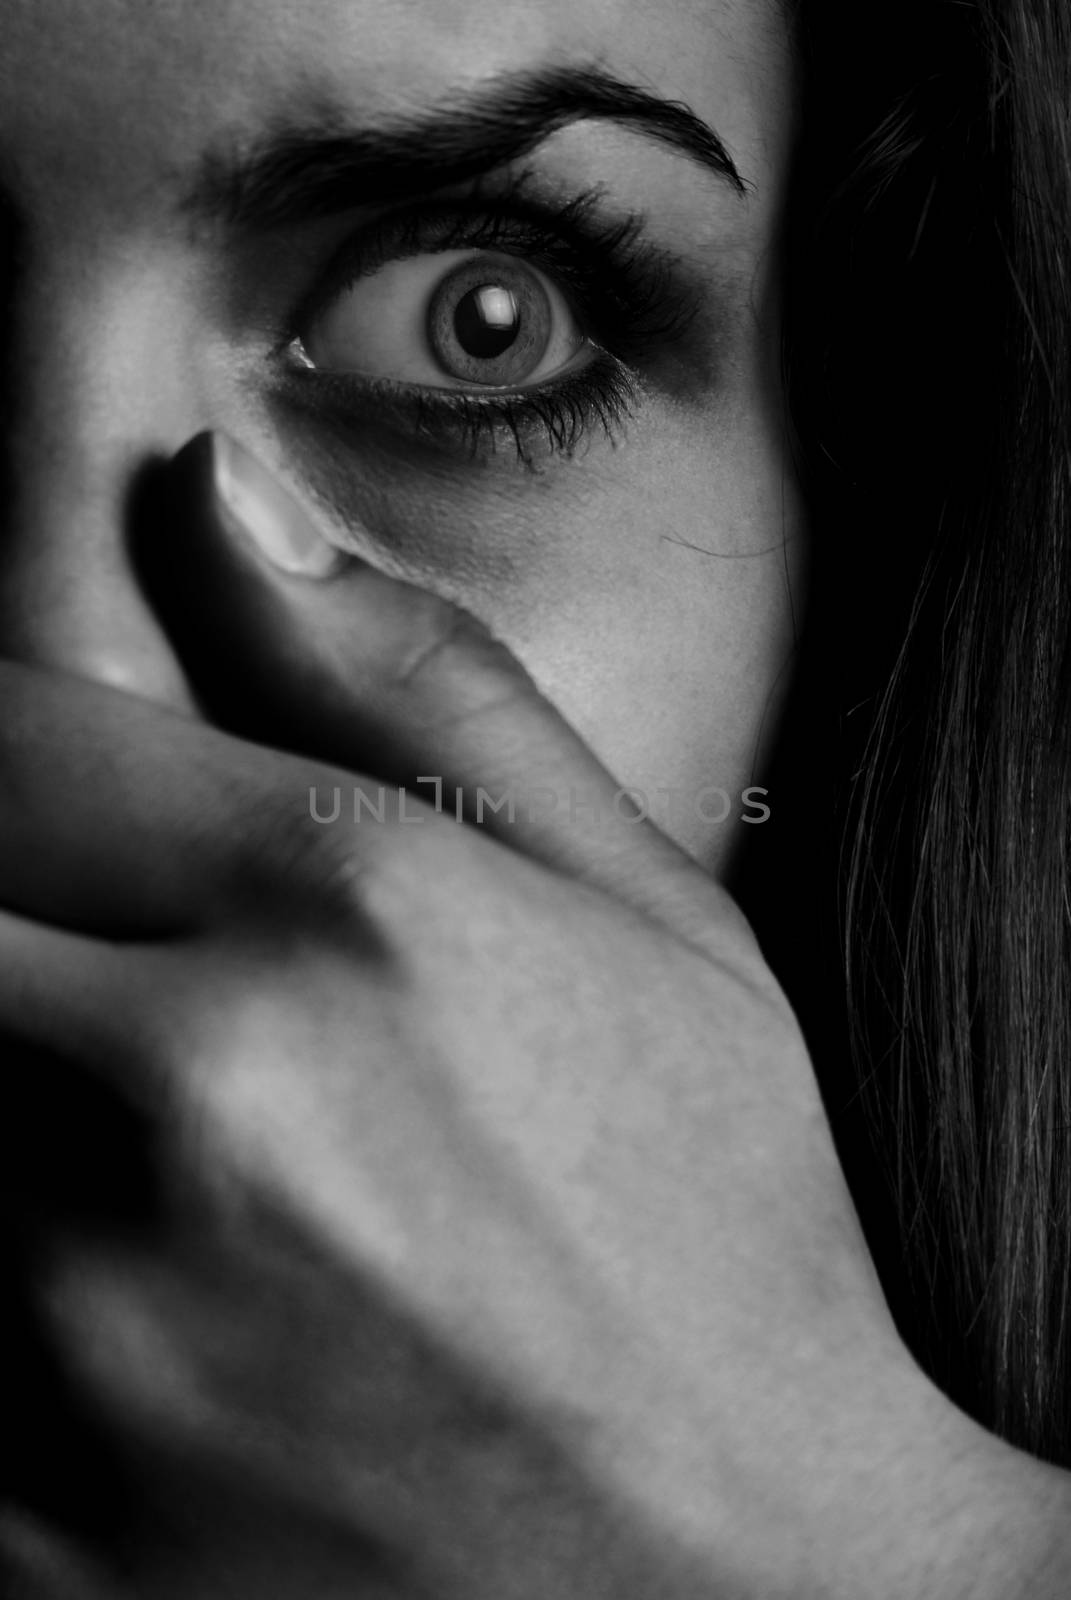 Horror monochrome photo of the afraid woman with mouth covered by hand